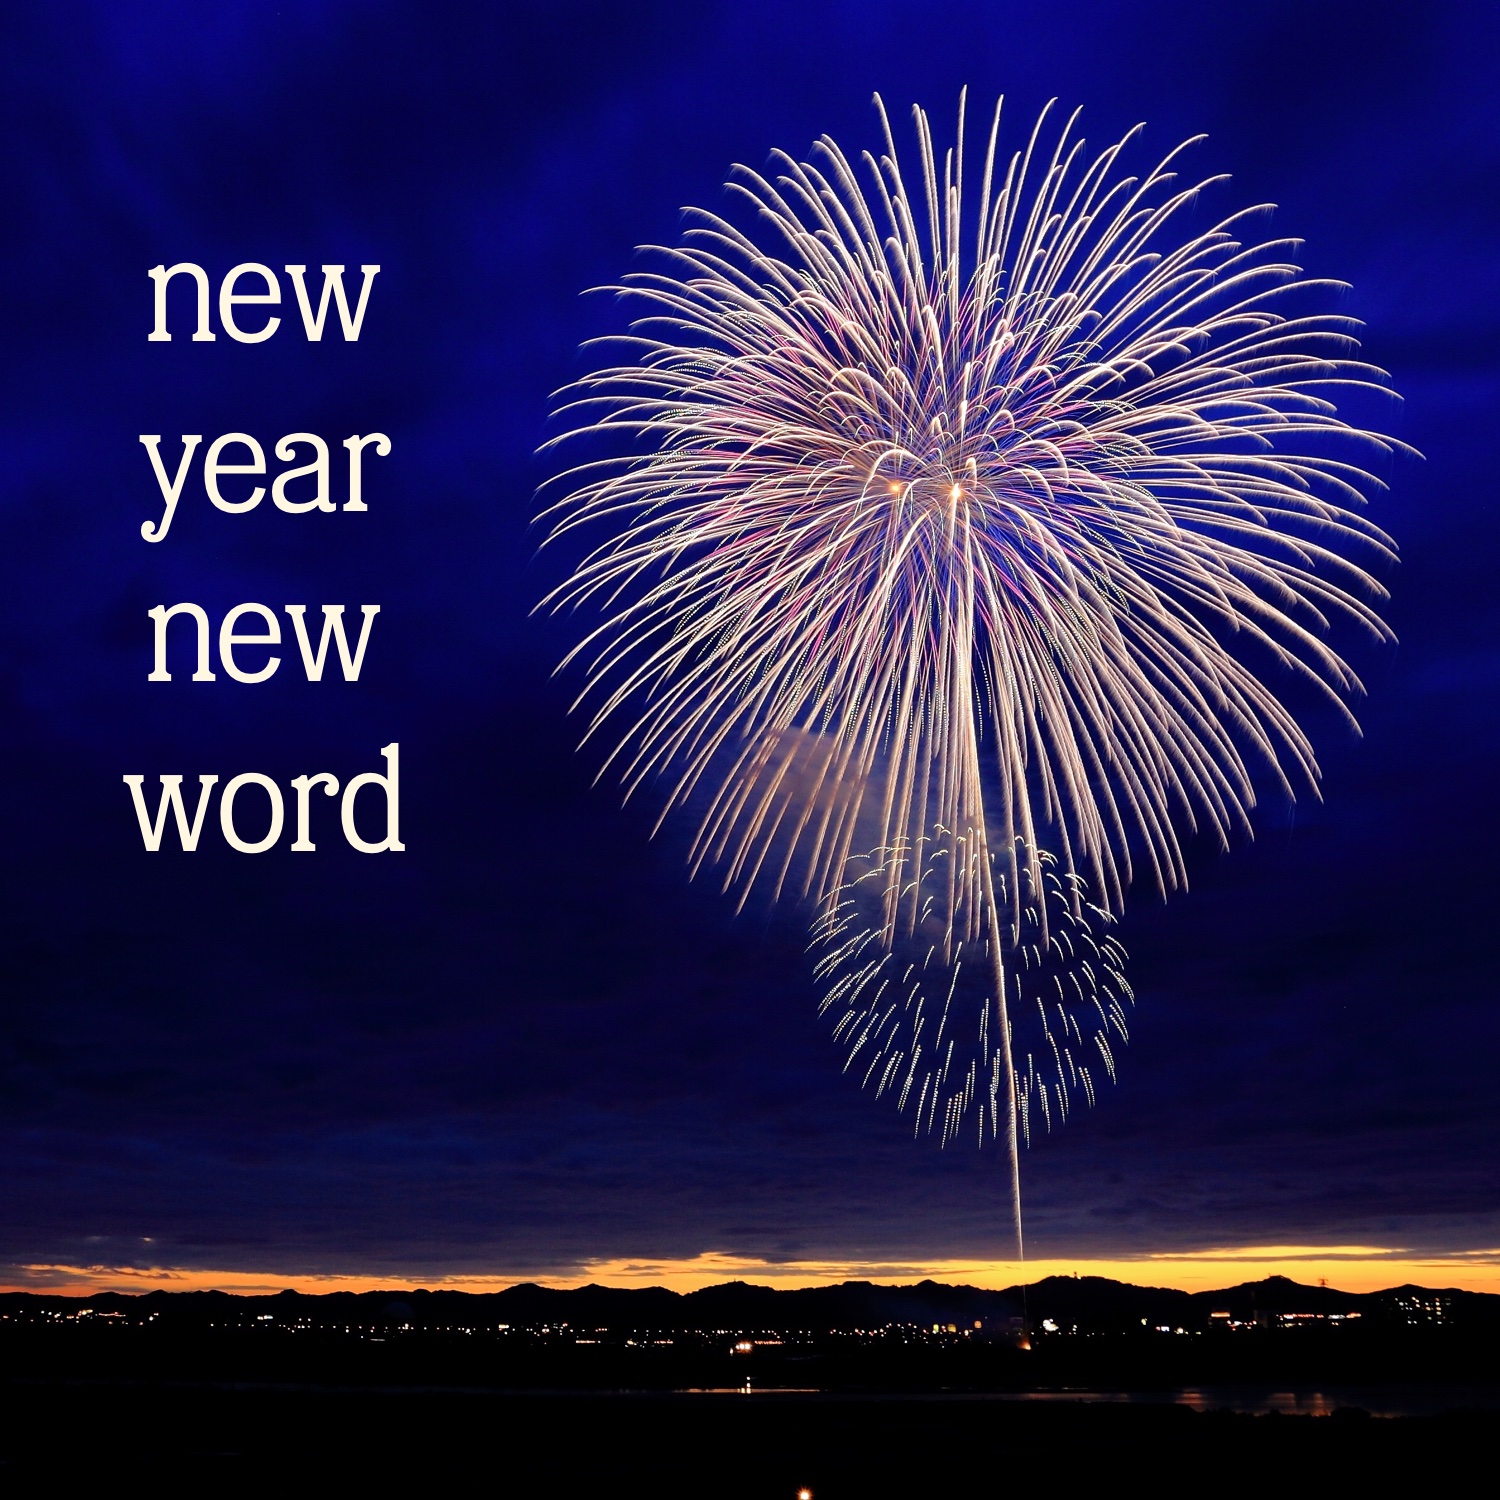 Yellow and pink fireworks in a dark blue sky, the words "new year new word" to the left.